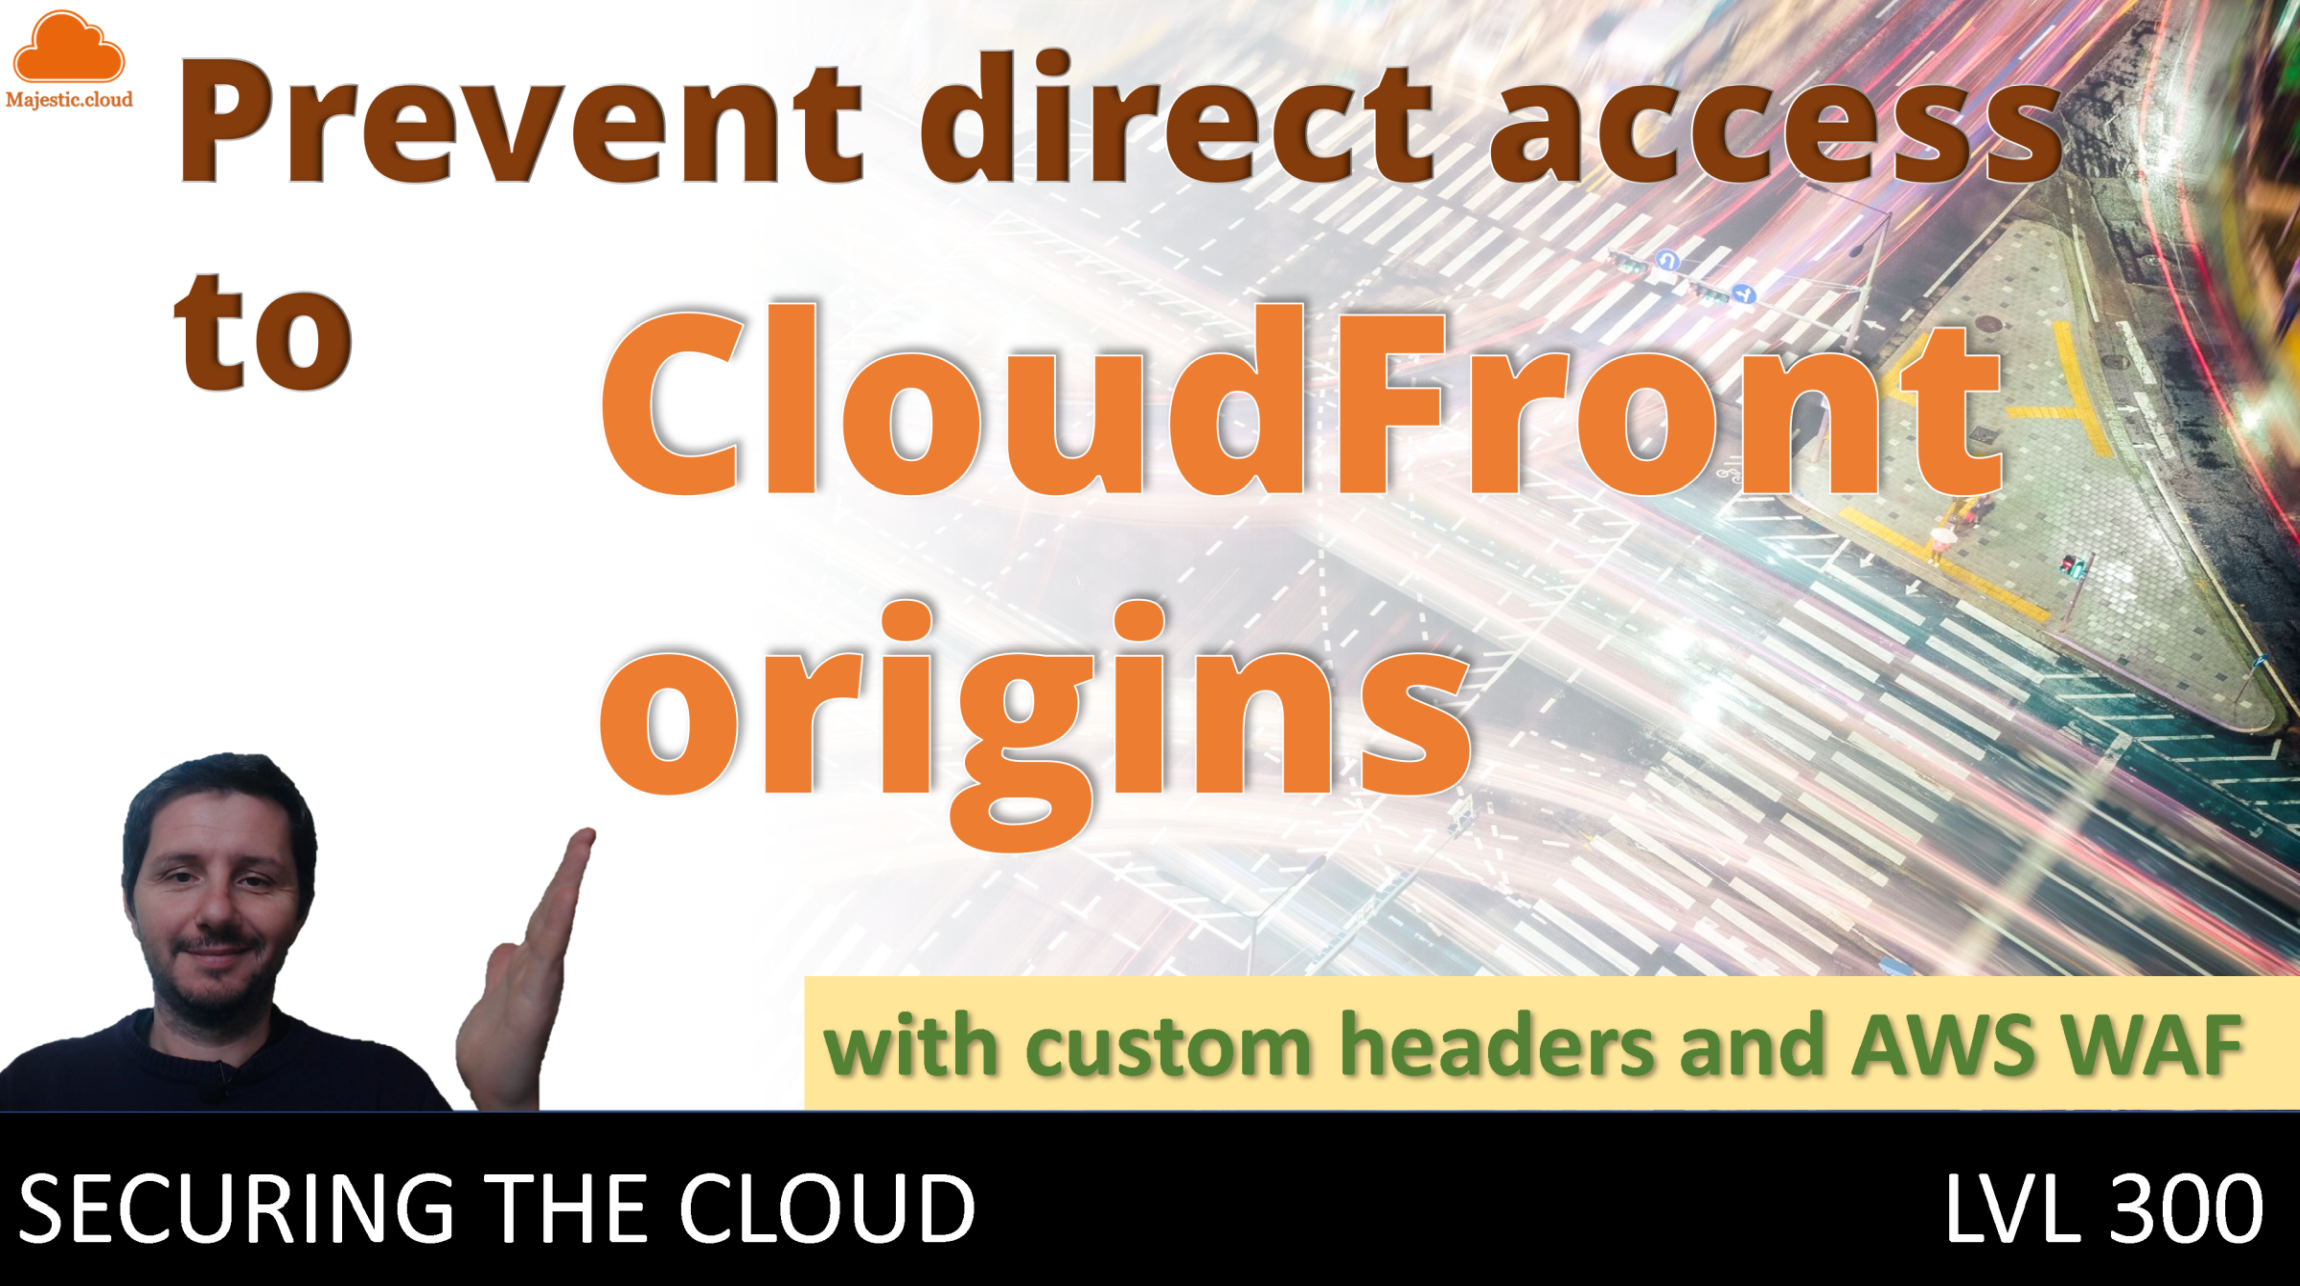 How to prevent direct access to CloudFront origins with custom headers and AWS WAF